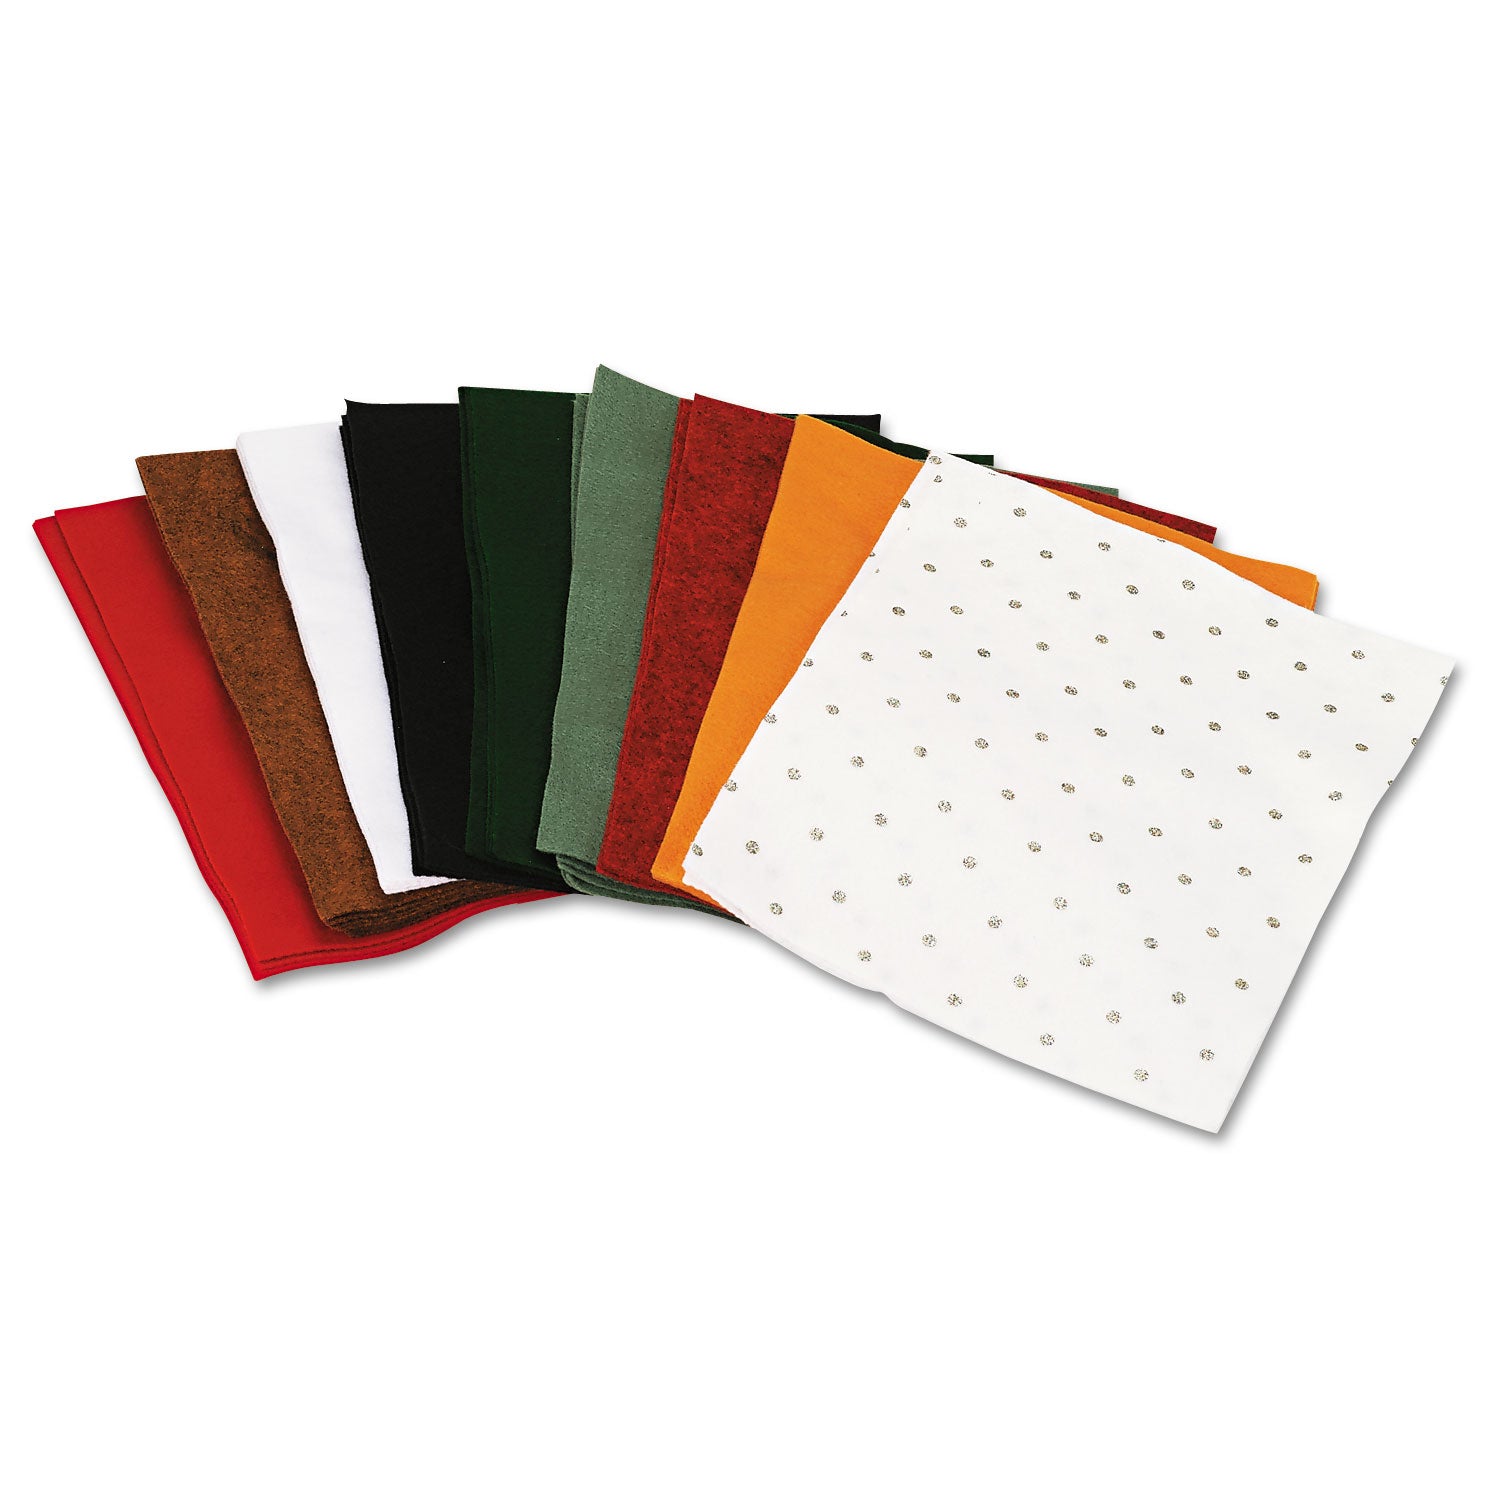 One Pound Felt Sheet Pack, Rectangular, 9 x 12, Assorted Colors, 30/Pack - 